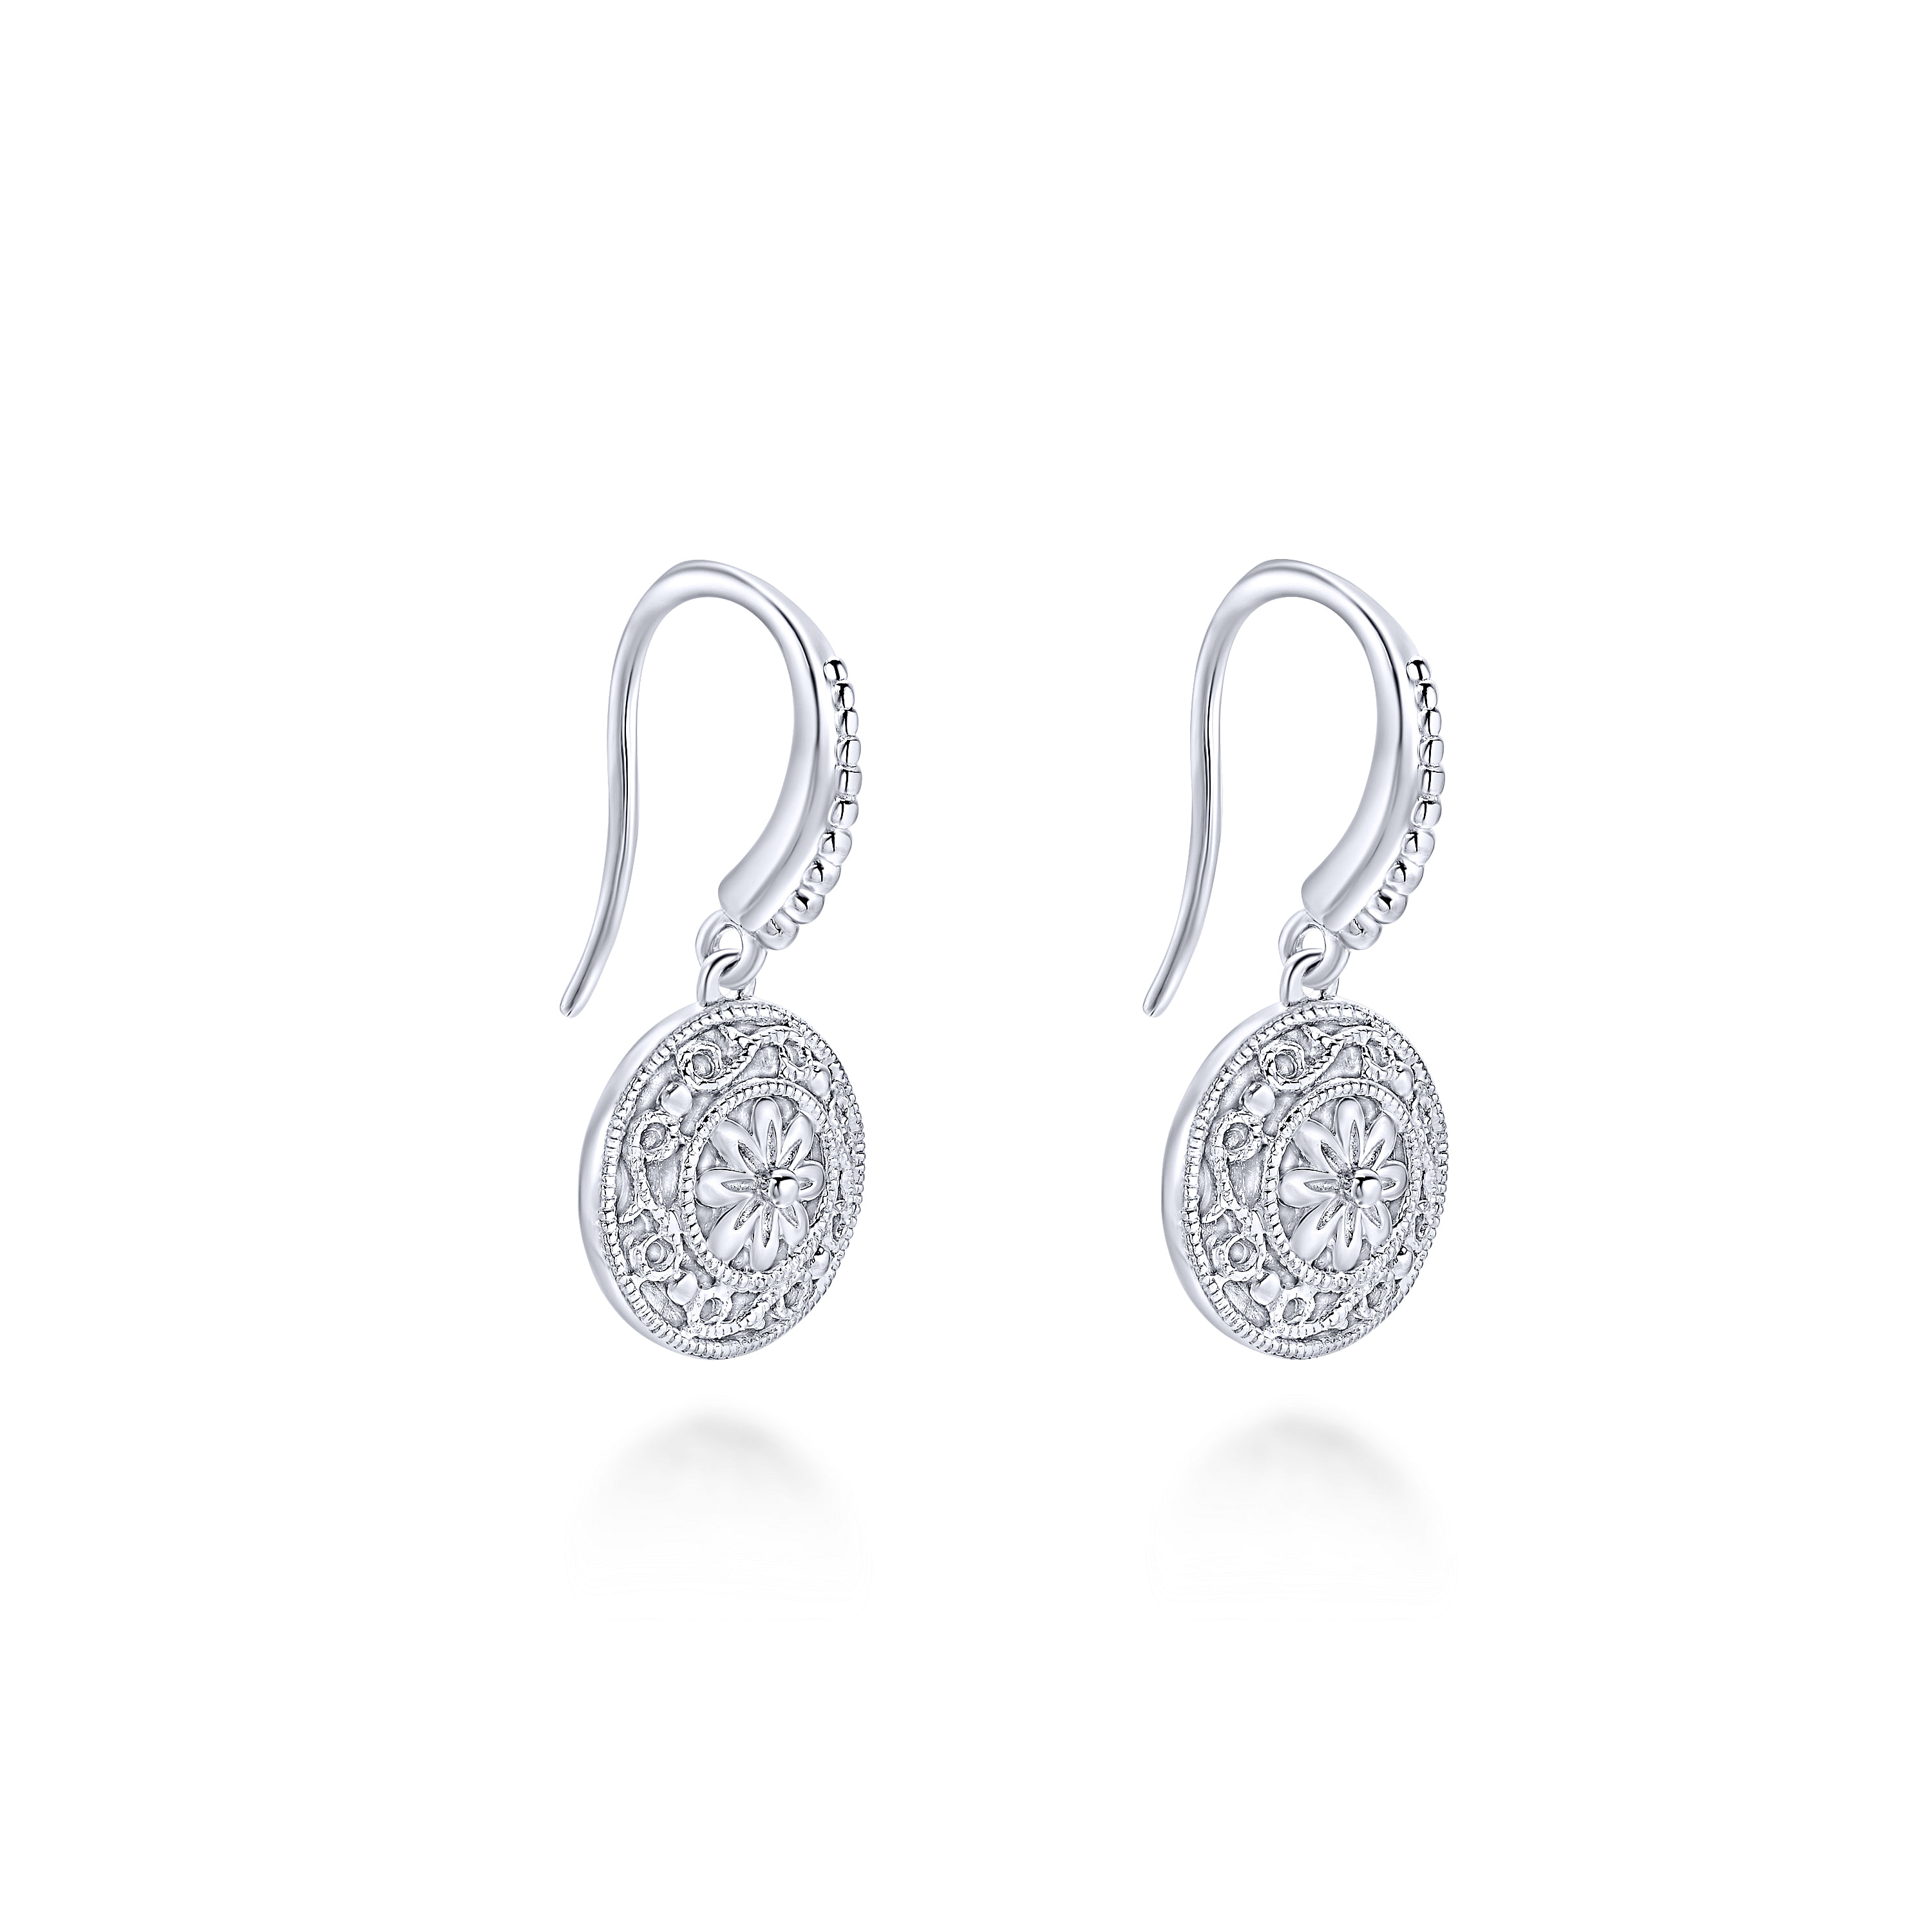 925 Sterling Silver Round Filigree Disc Earrings